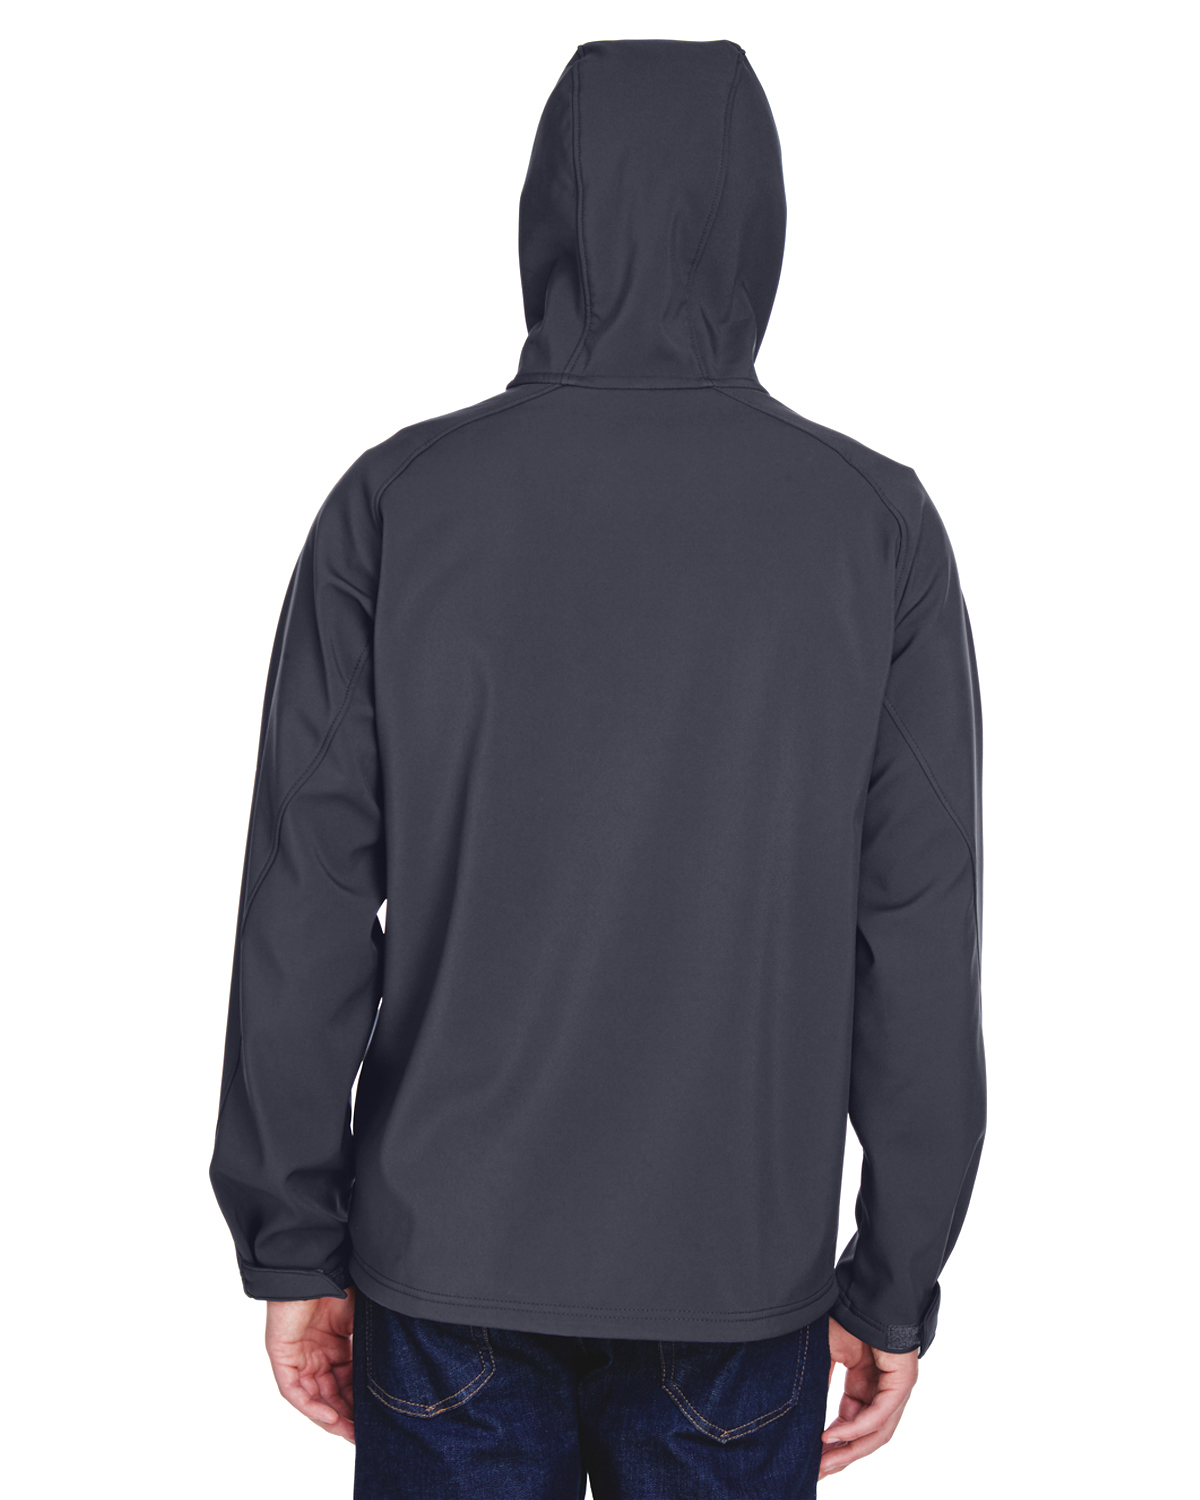 Men's Prospect Two-Layer Fleece Bonded Soft Shell Hooded Jacket - FOSSIL GREY - XL - image 2 of 3